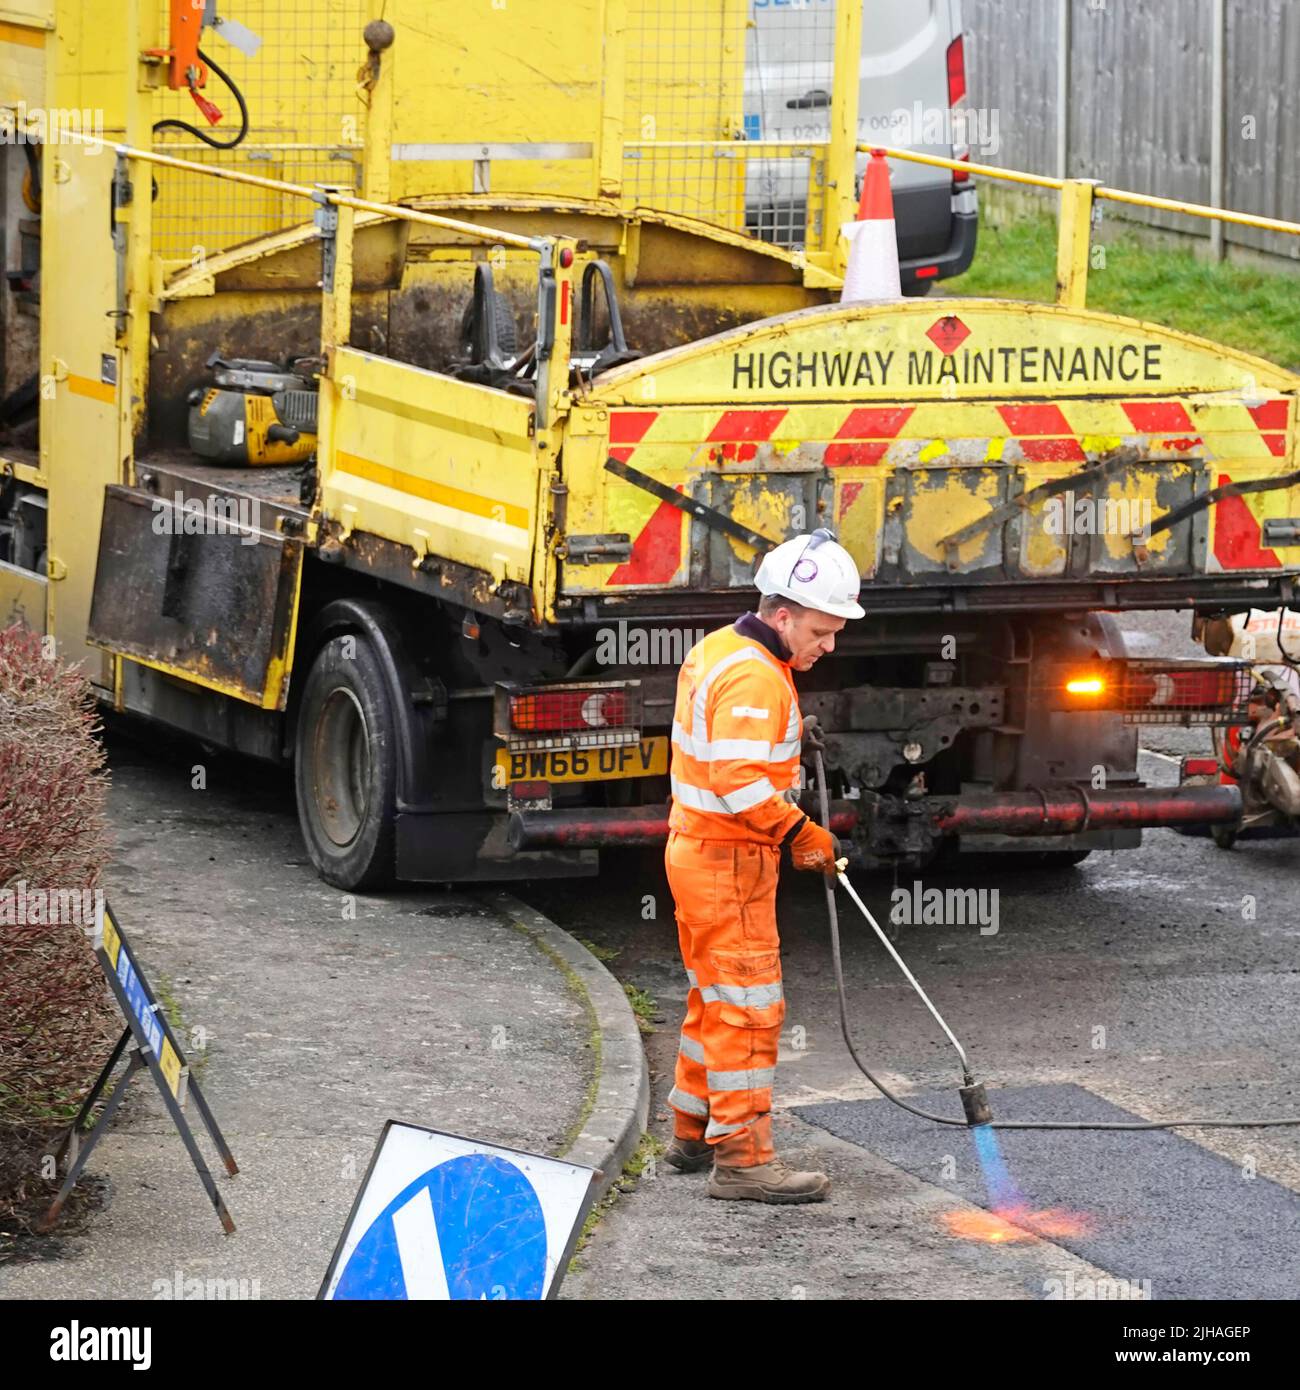 Highway Maintenance man at work on heat sealing tarmac road pothole repair with gas flame torch high visibility yellow tipper lorry truck England UK Stock Photo